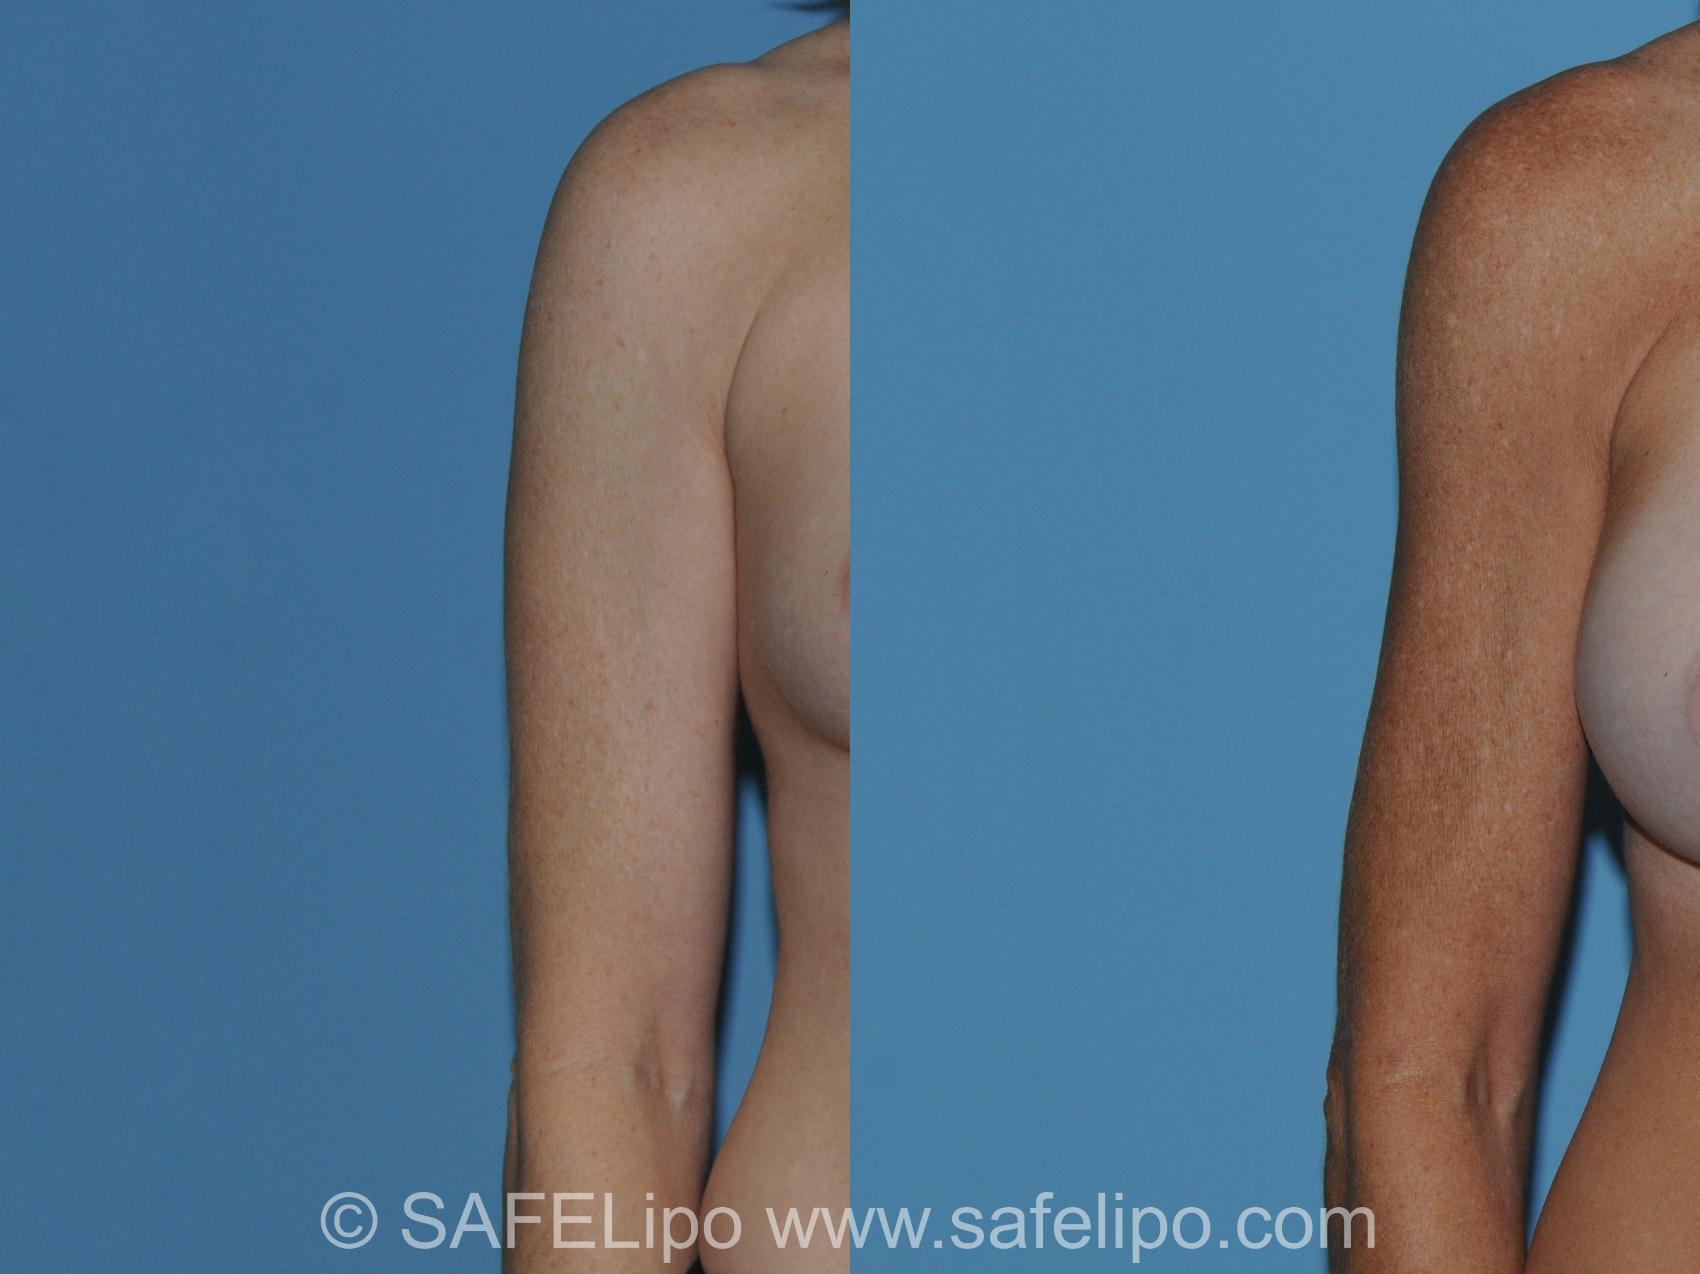 SAFELipo Front Right Photo, Shreveport, Louisiana, The Wall Center for Plastic Surgery, Case 296